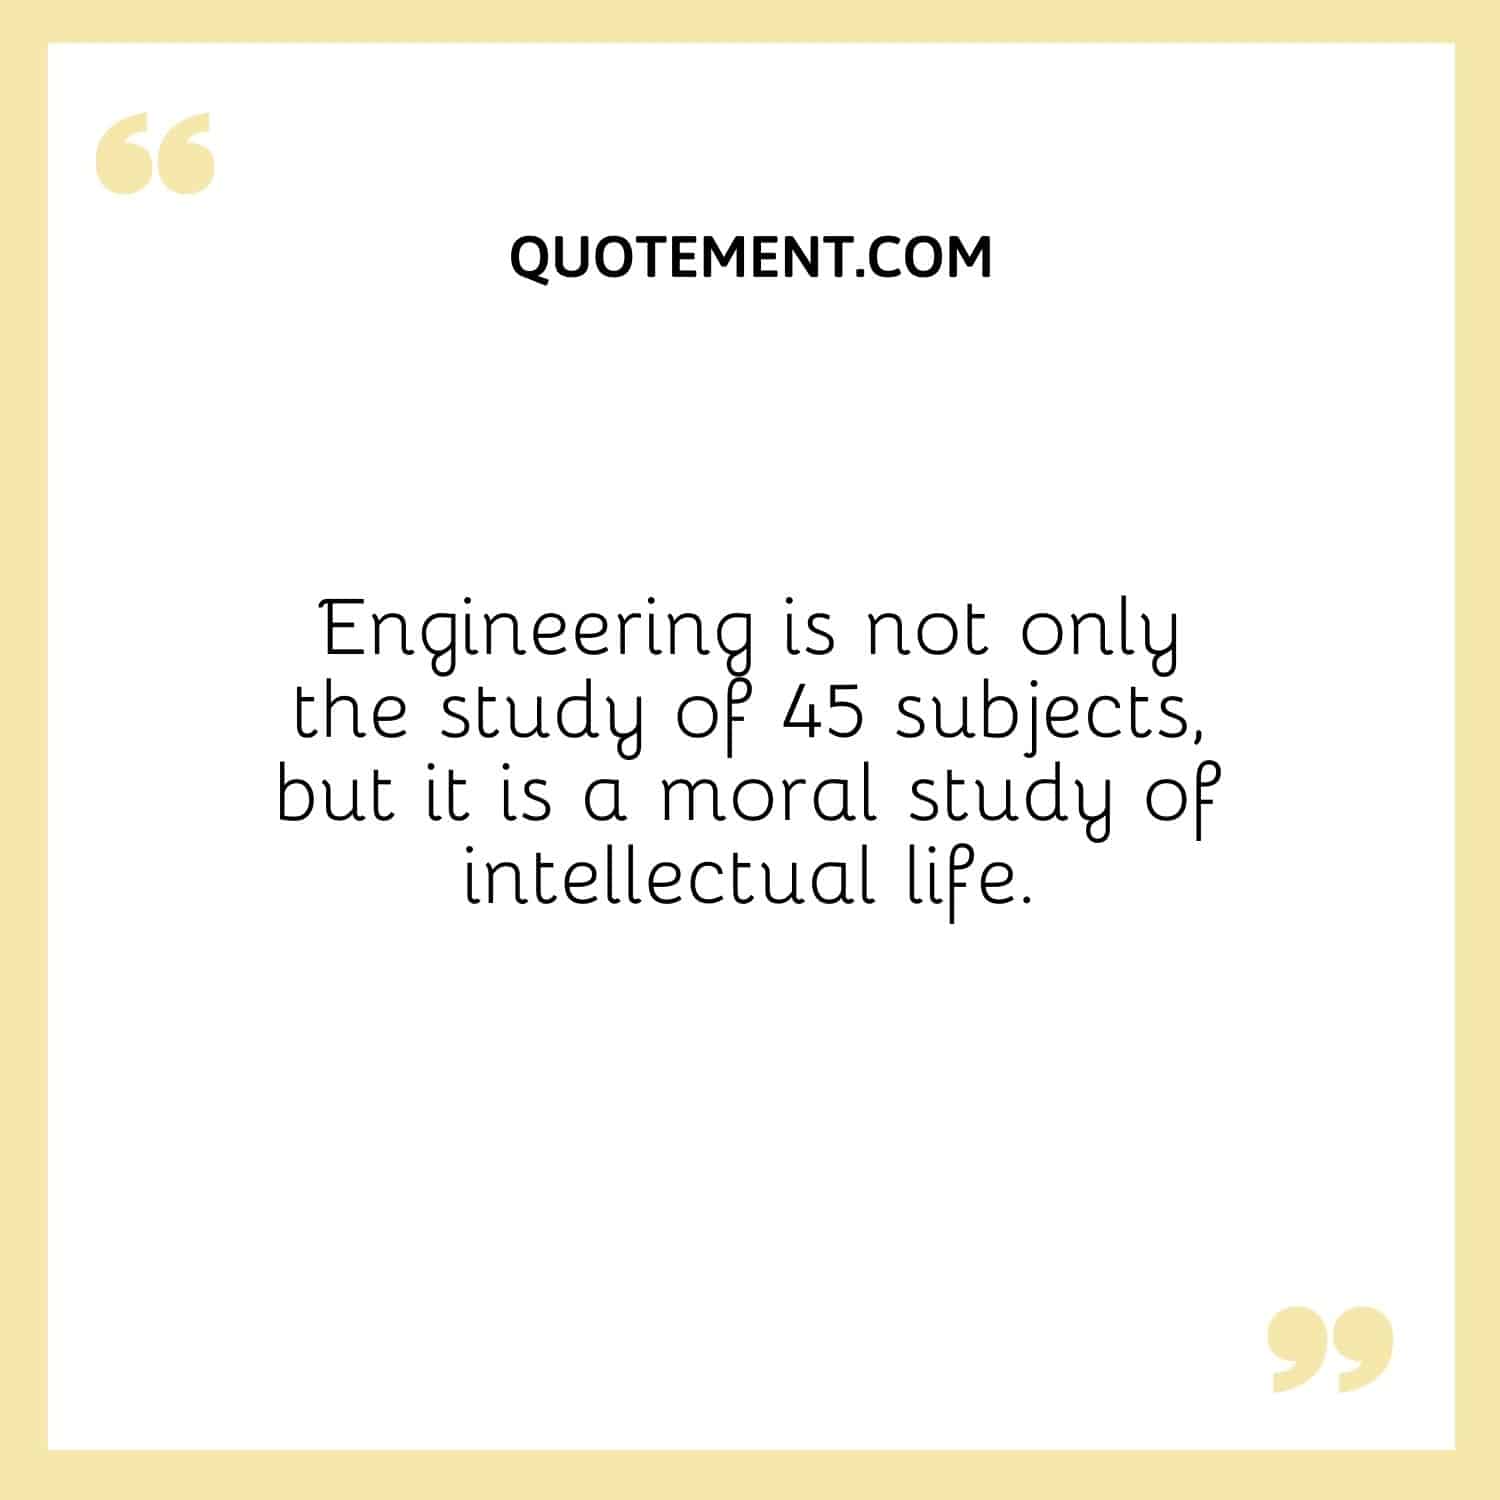 Engineering is not only the study of 45 subjects, but it is a moral study of intellectual life.